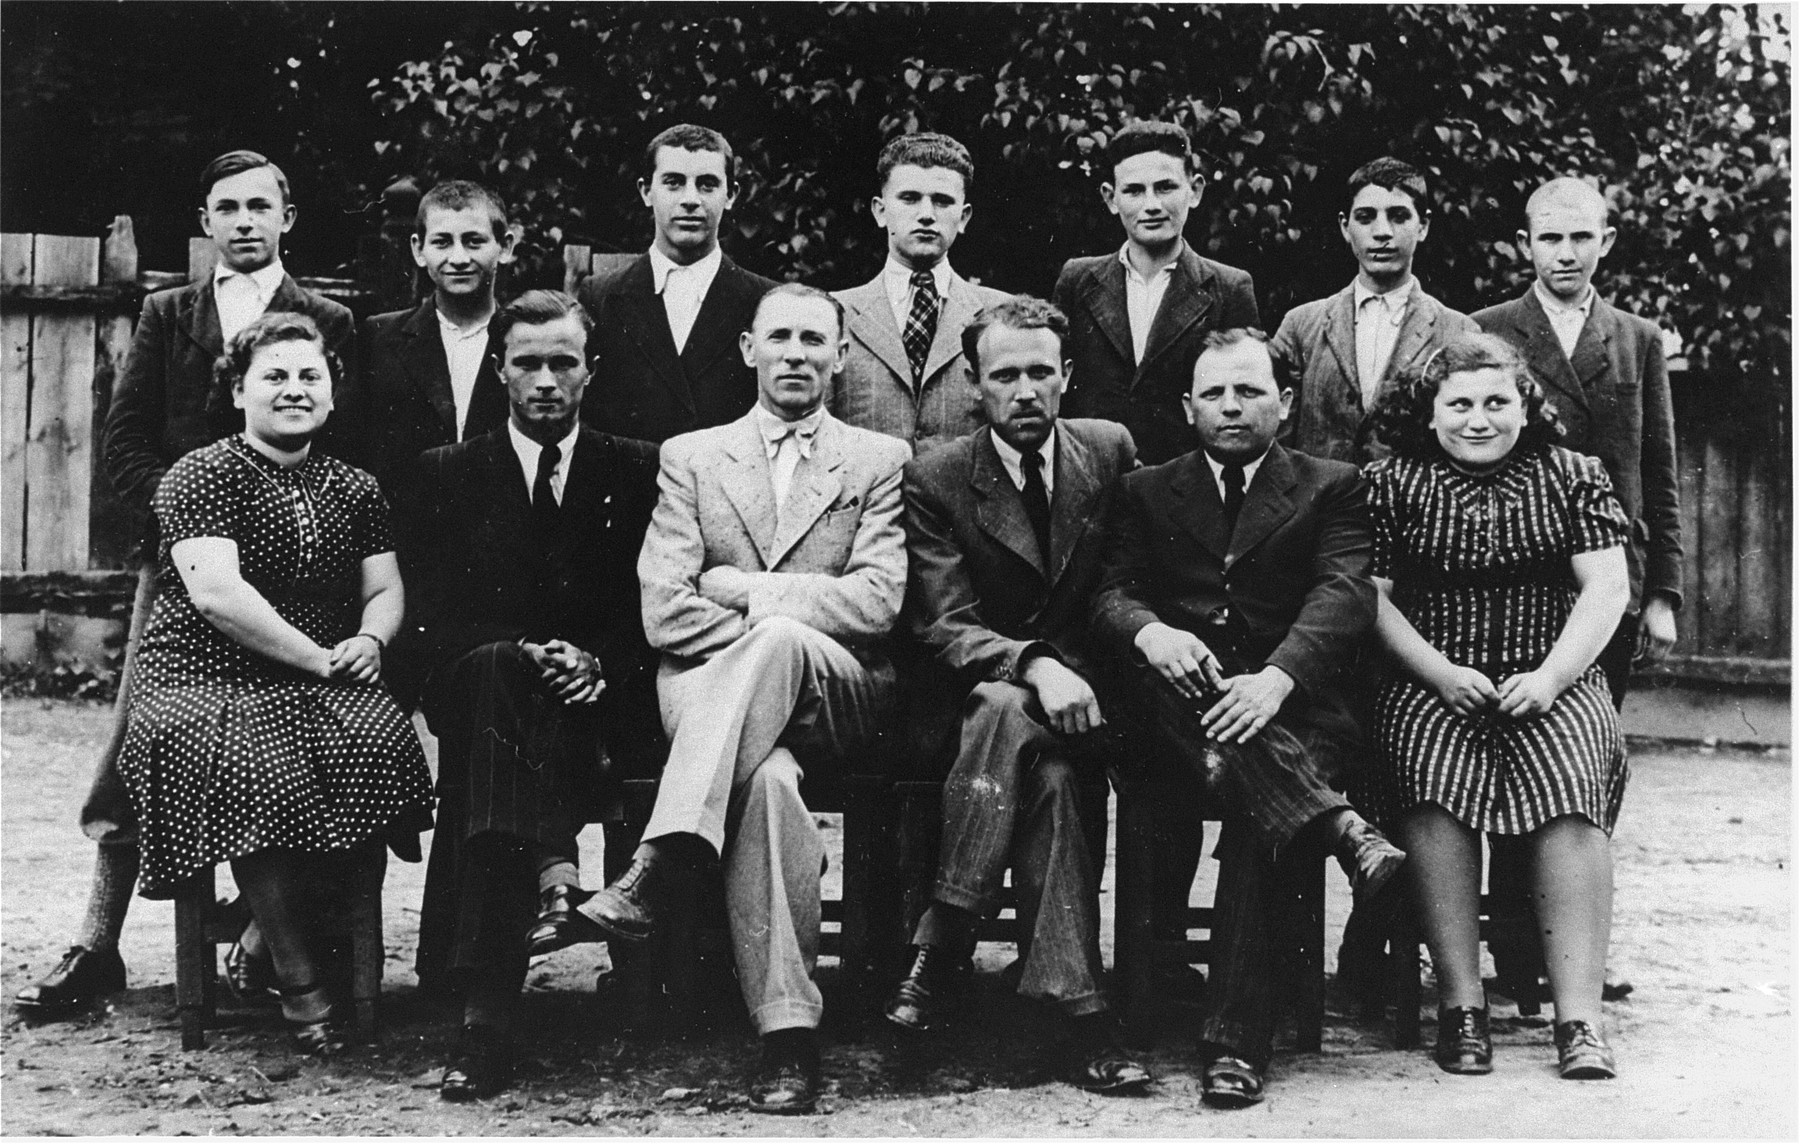 Group portrait of students who are training to be tailors at a vocational school in Tacovo.

Pictured in the front row, from left to right are: Malvina Ickovic; Jonko Jeno (the Hungarian language teacher); Raives (the director of the school); unknown; Mendel Rezmovics (a teacher); and Sheindy Ickovic.  In the back row, from left to right are: Horbas; Tobias; Stal; Ludvic Ickovic; Lajbl Fixler; Cali Kaufman and Moshe Joel Smajovics.